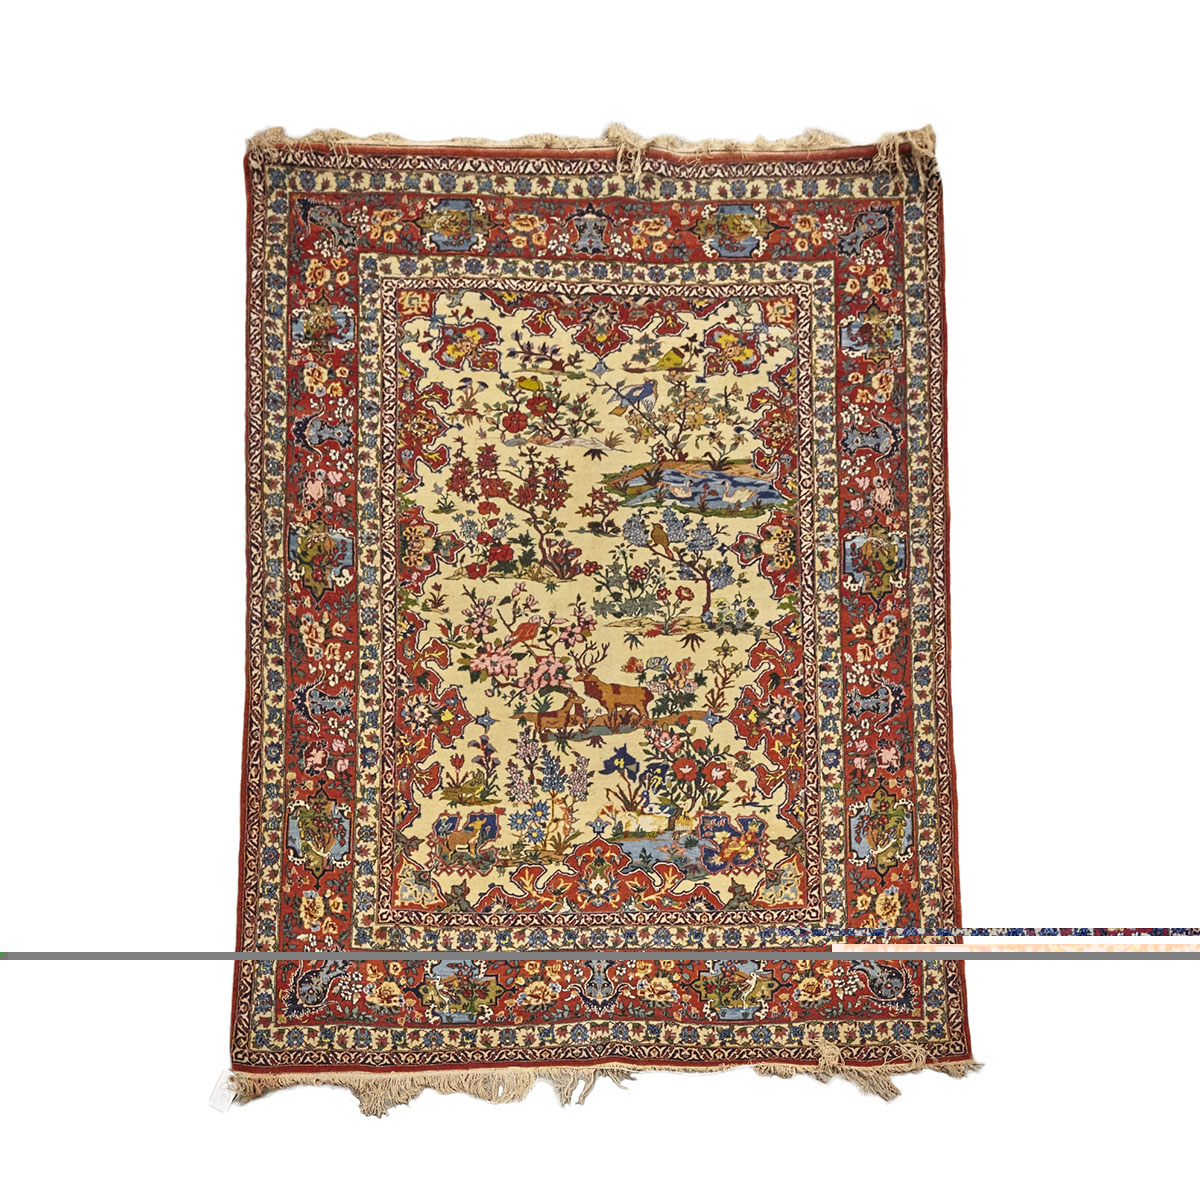 Central Persian Pictorial Rug, middle 20th century